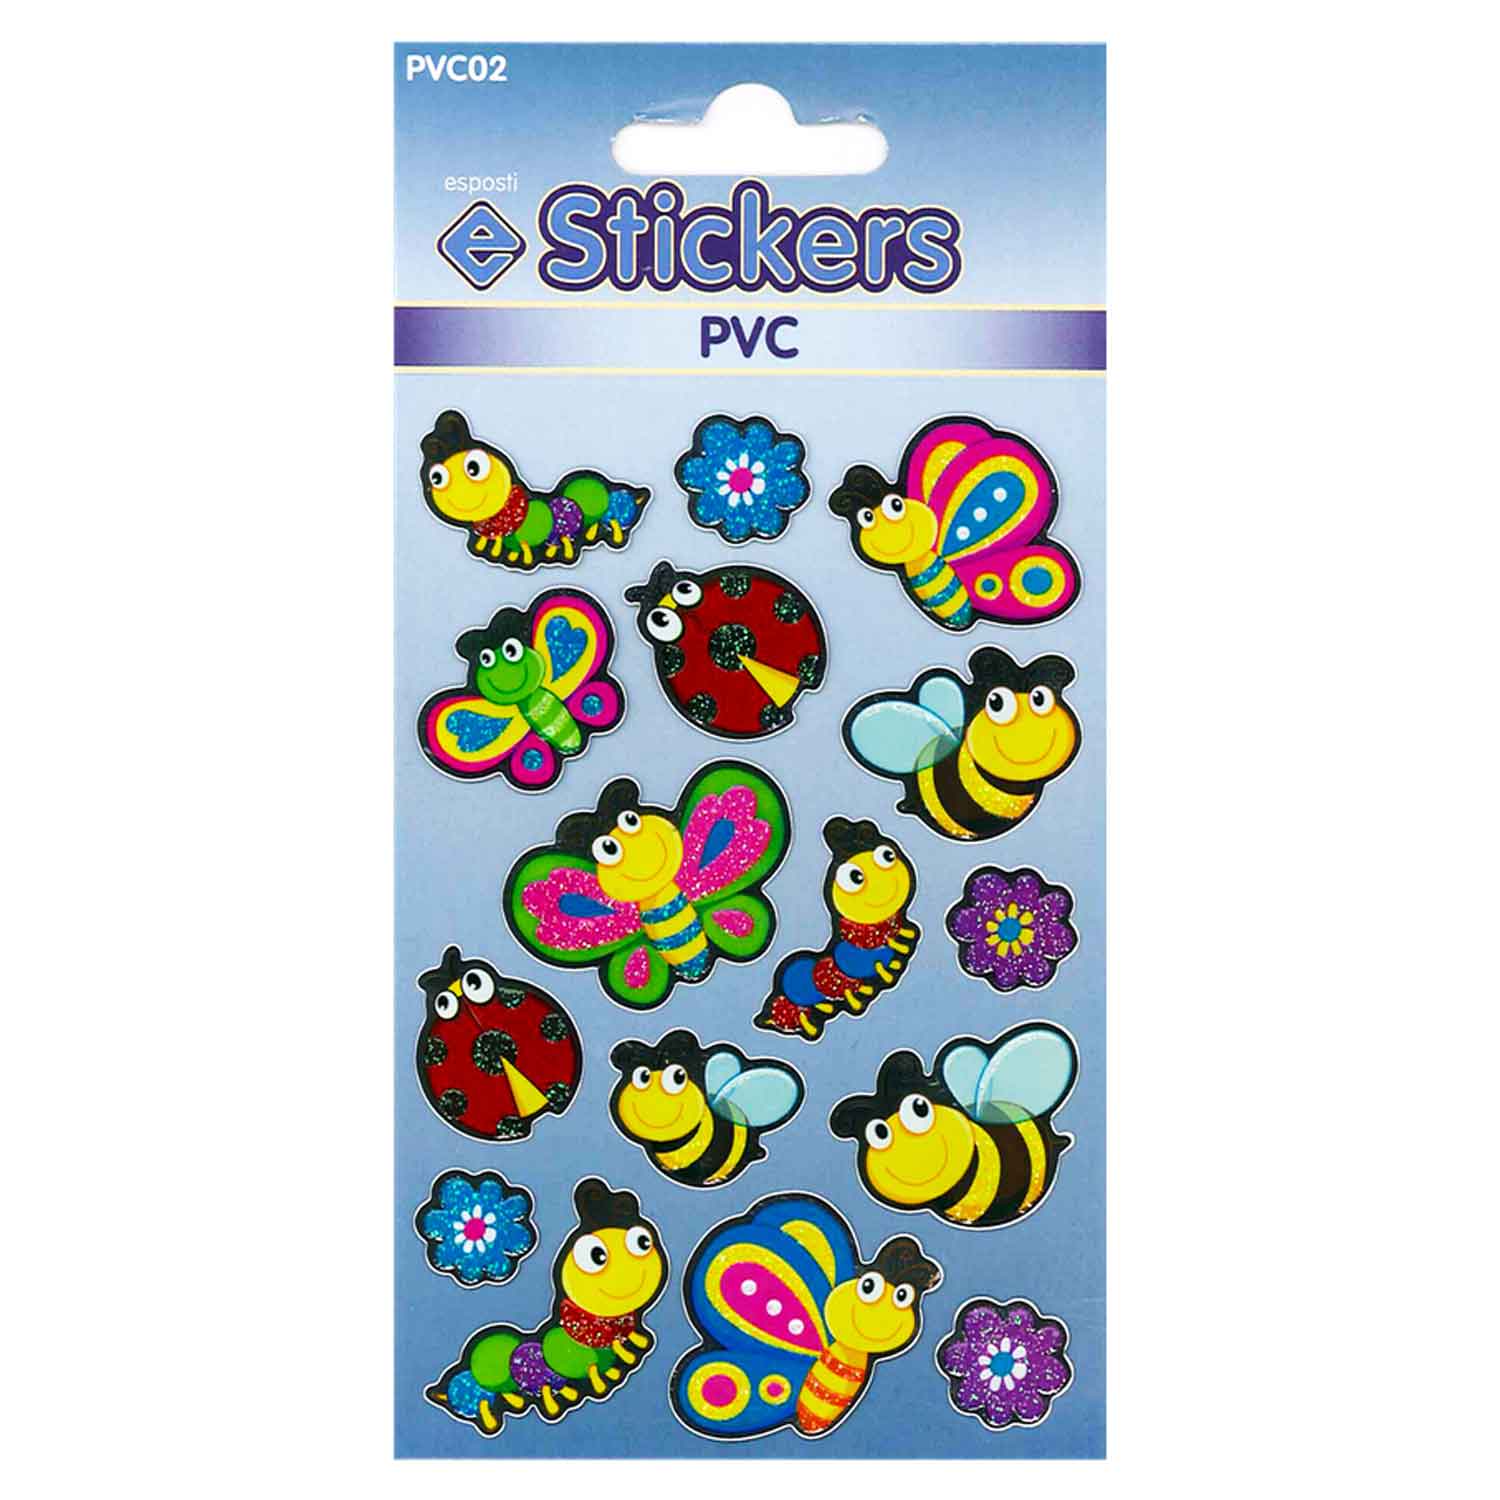 Bugs Self Adhesive PVC Novelty Stickers - Pack of 10